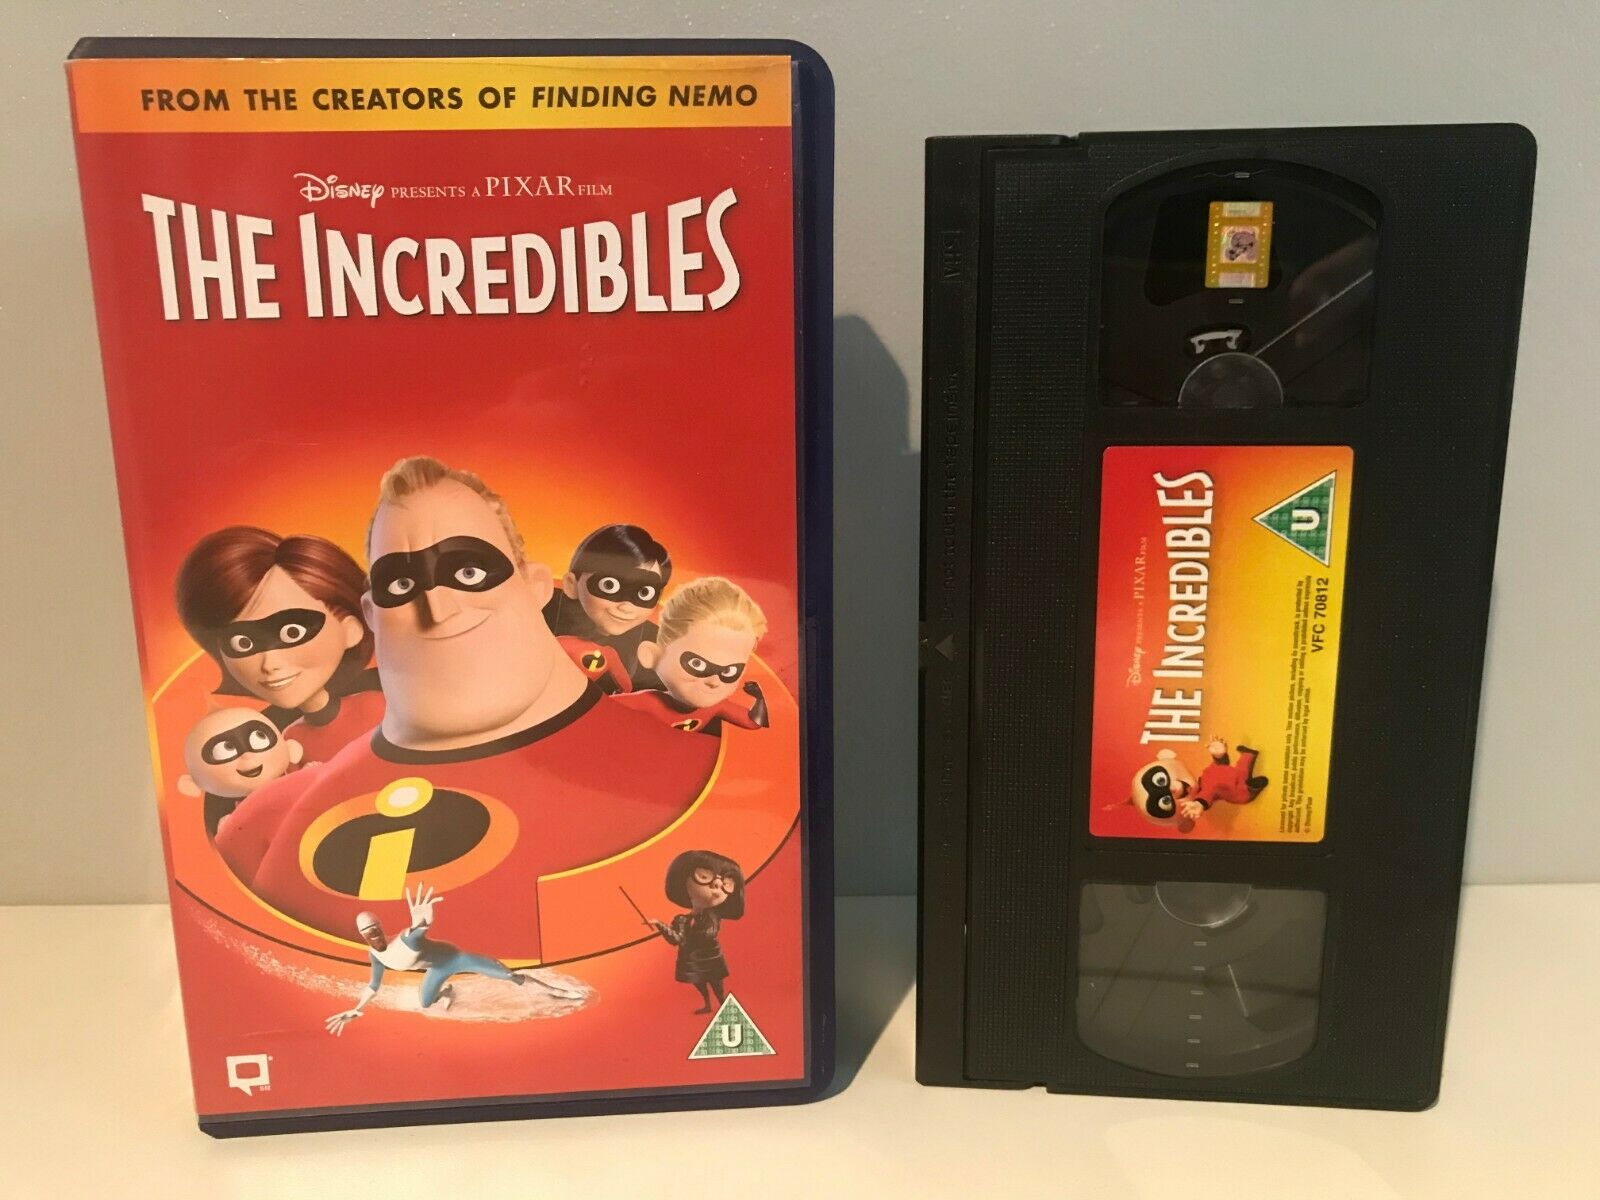 The Incredibles (2004): Superhero Action - Computer-Animated - Children's - VHS-